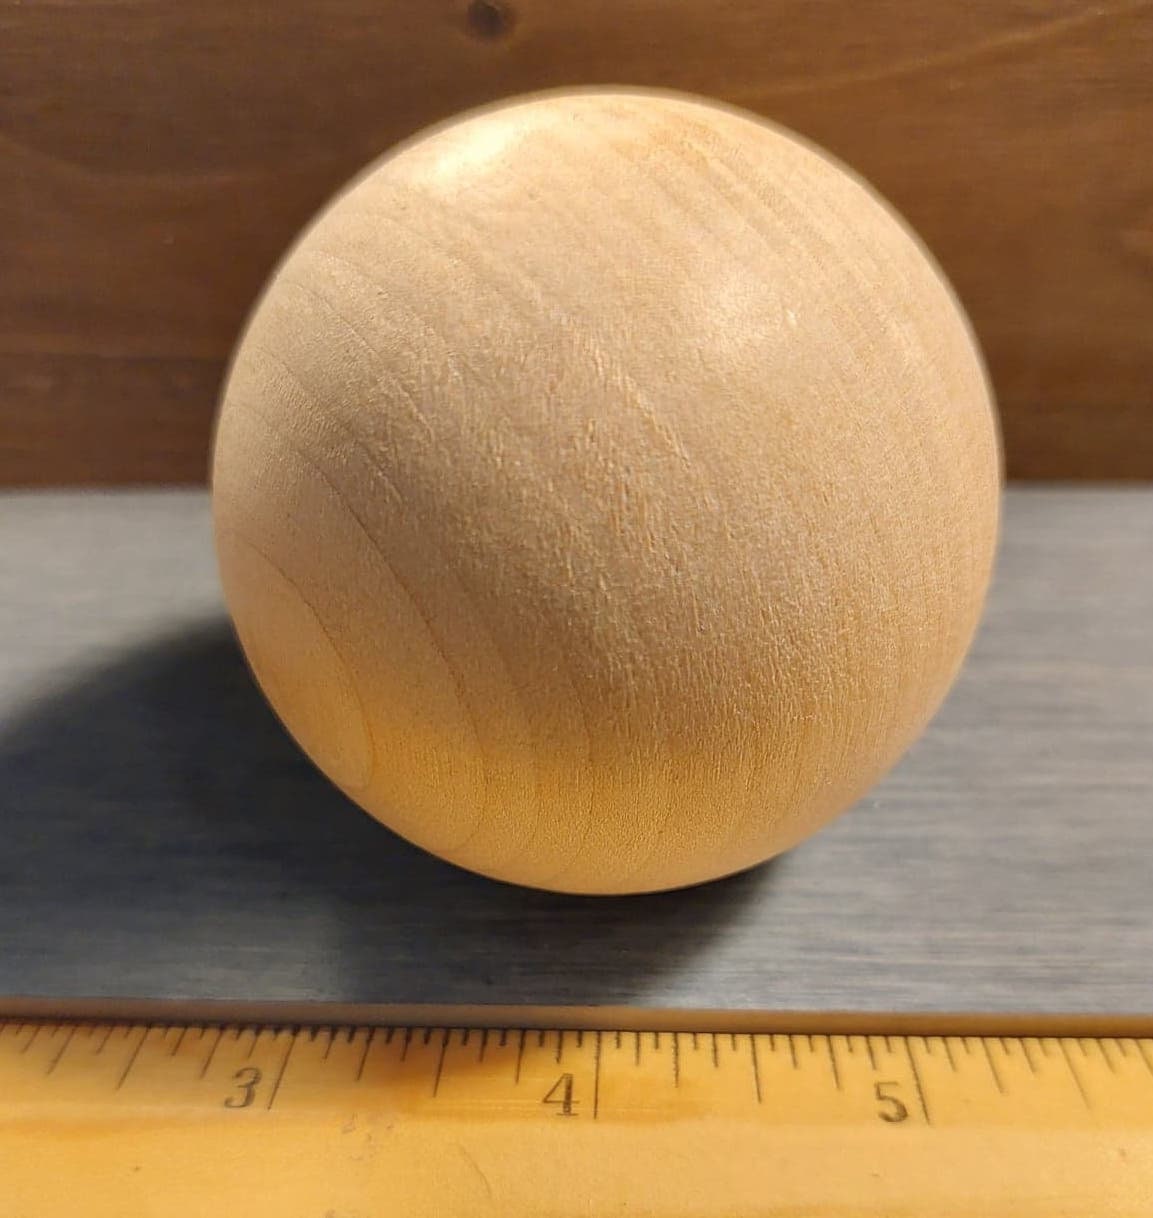 Wood Ball 165 Mm Large Wood Ball Wood Sphere 165 Mm Wood Ball 6,5 Turned Wooden  Ball Wood Ball Ornament Unfinished Wood Ball Quality Ball -  Norway